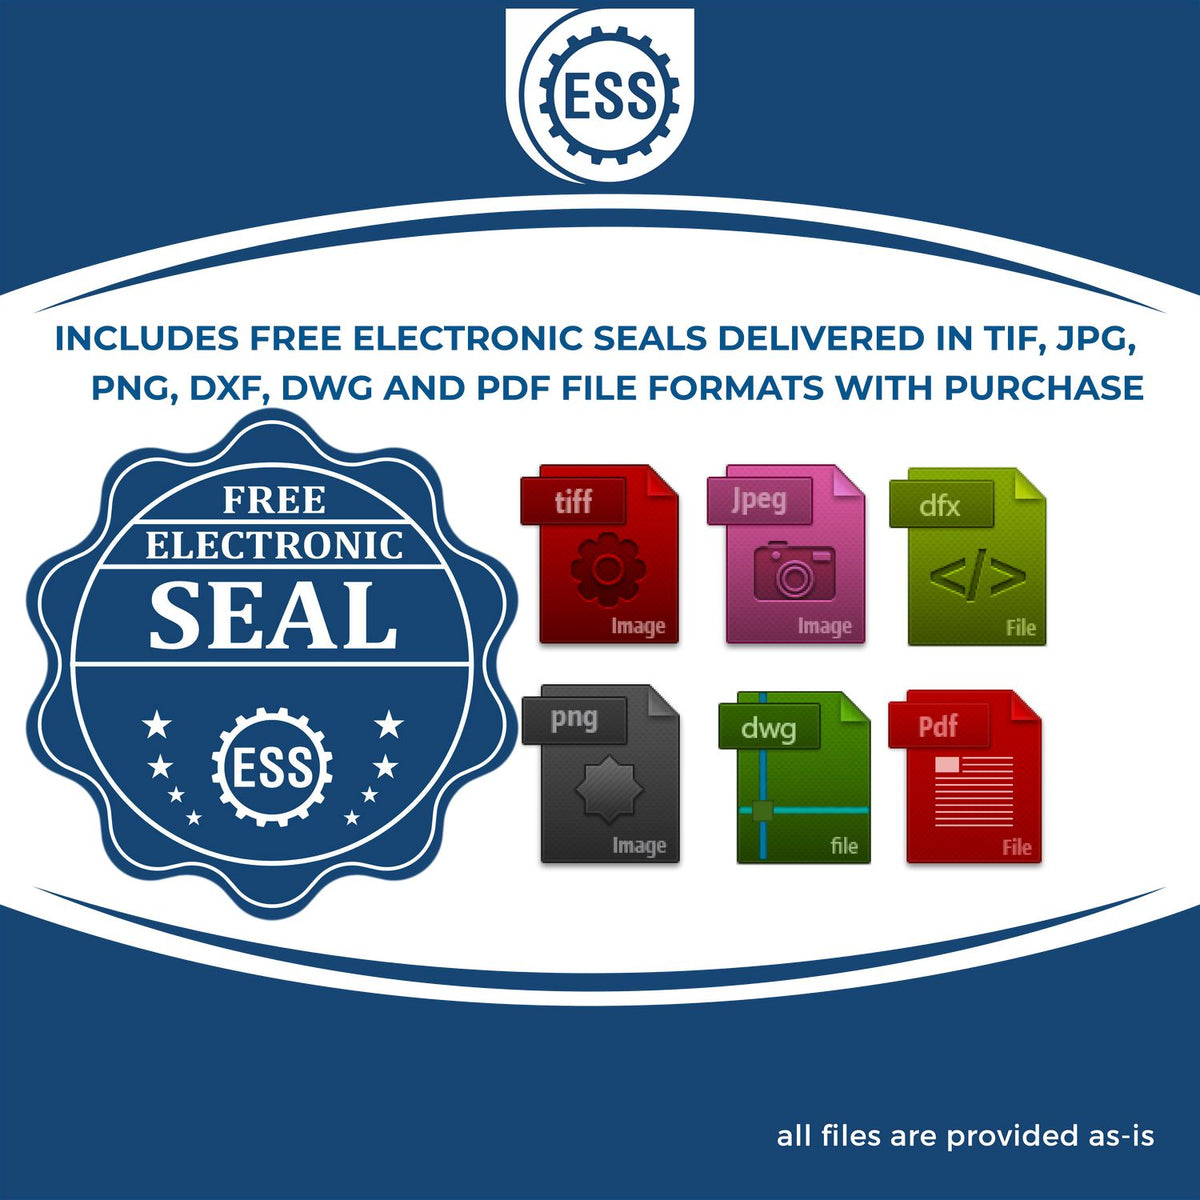 An infographic for the free electronic seal for the Hybrid Maryland Geologist Seal illustrating the different file type icons such as DXF, DWG, TIF, JPG and PNG.